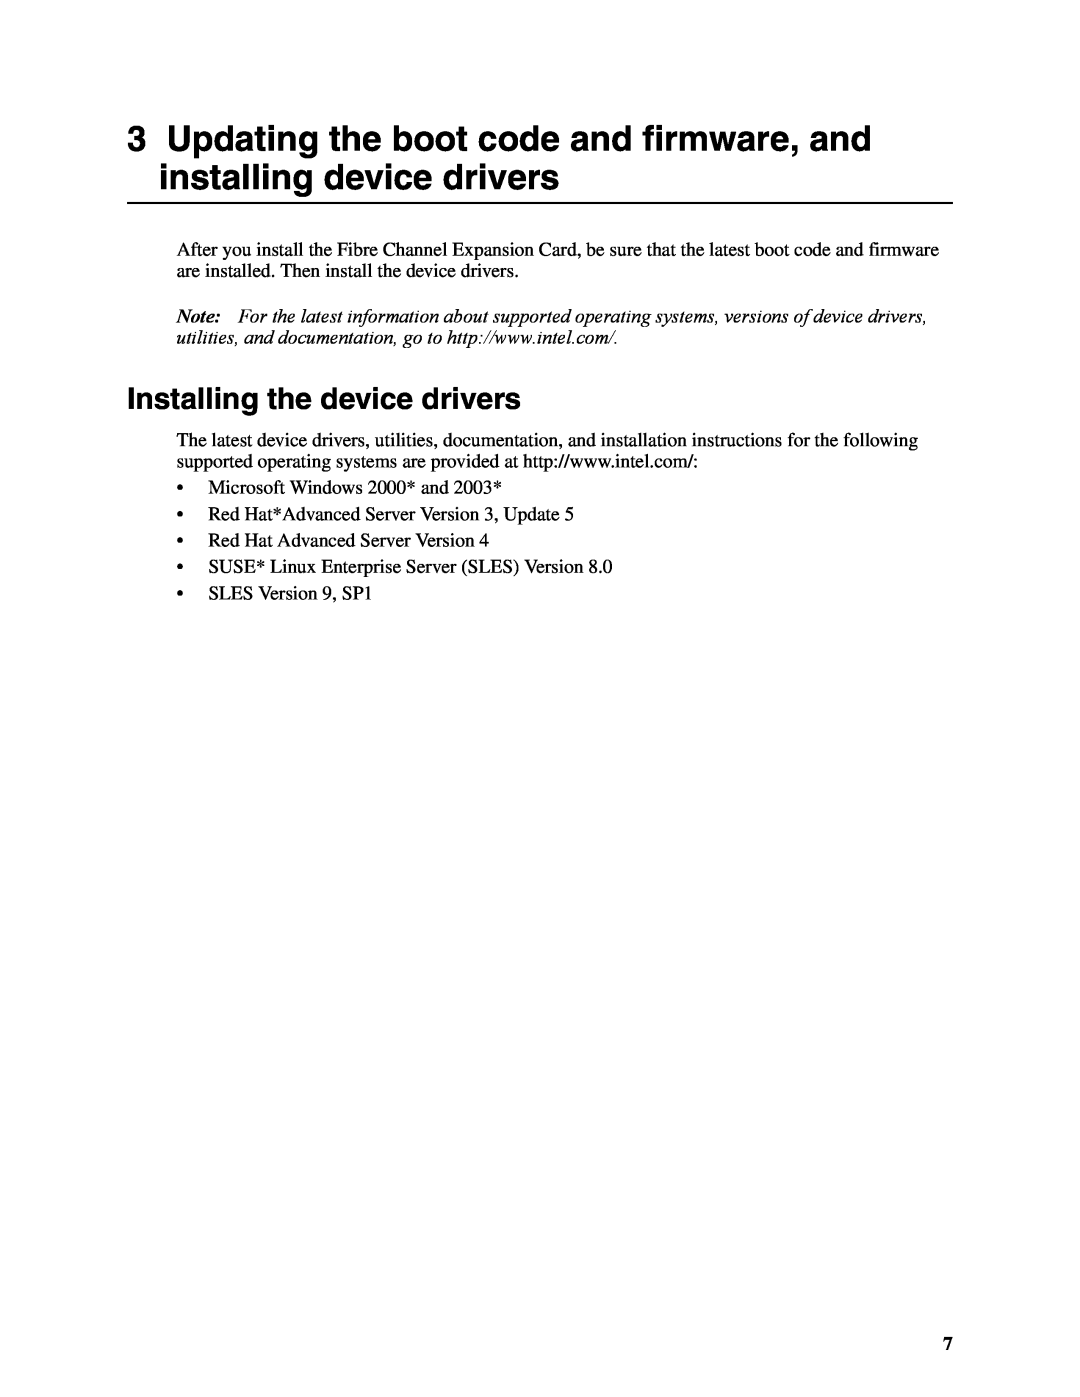 Intel SEBFCM4 manual Updating the boot code and firmware, and installing device drivers, Installing the device drivers 